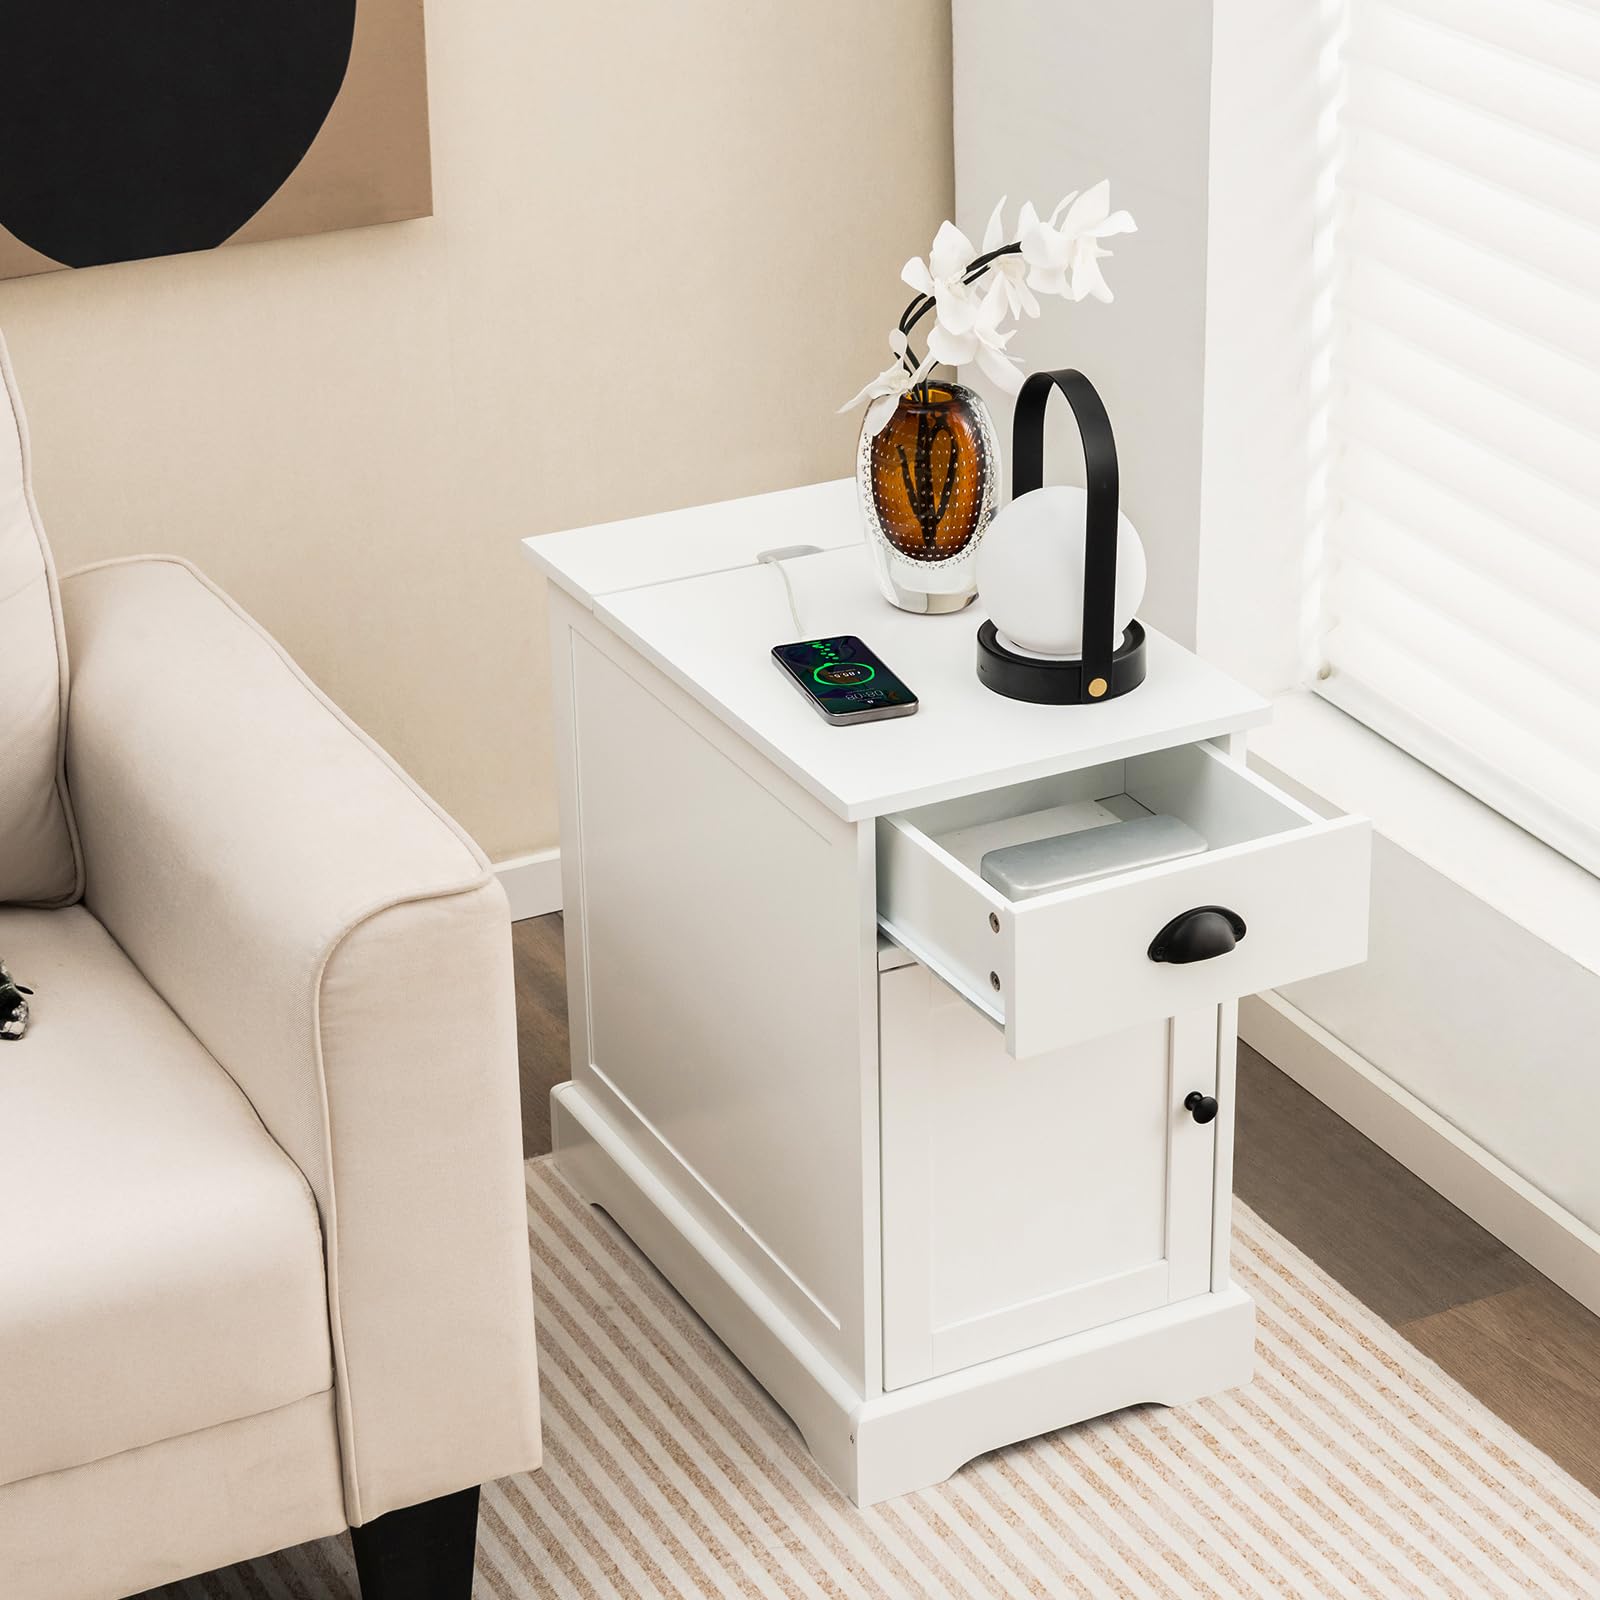 Giantex End Table with Charging Station Set of 2, Flip Top Side Table with USB Ports and Outlets, White